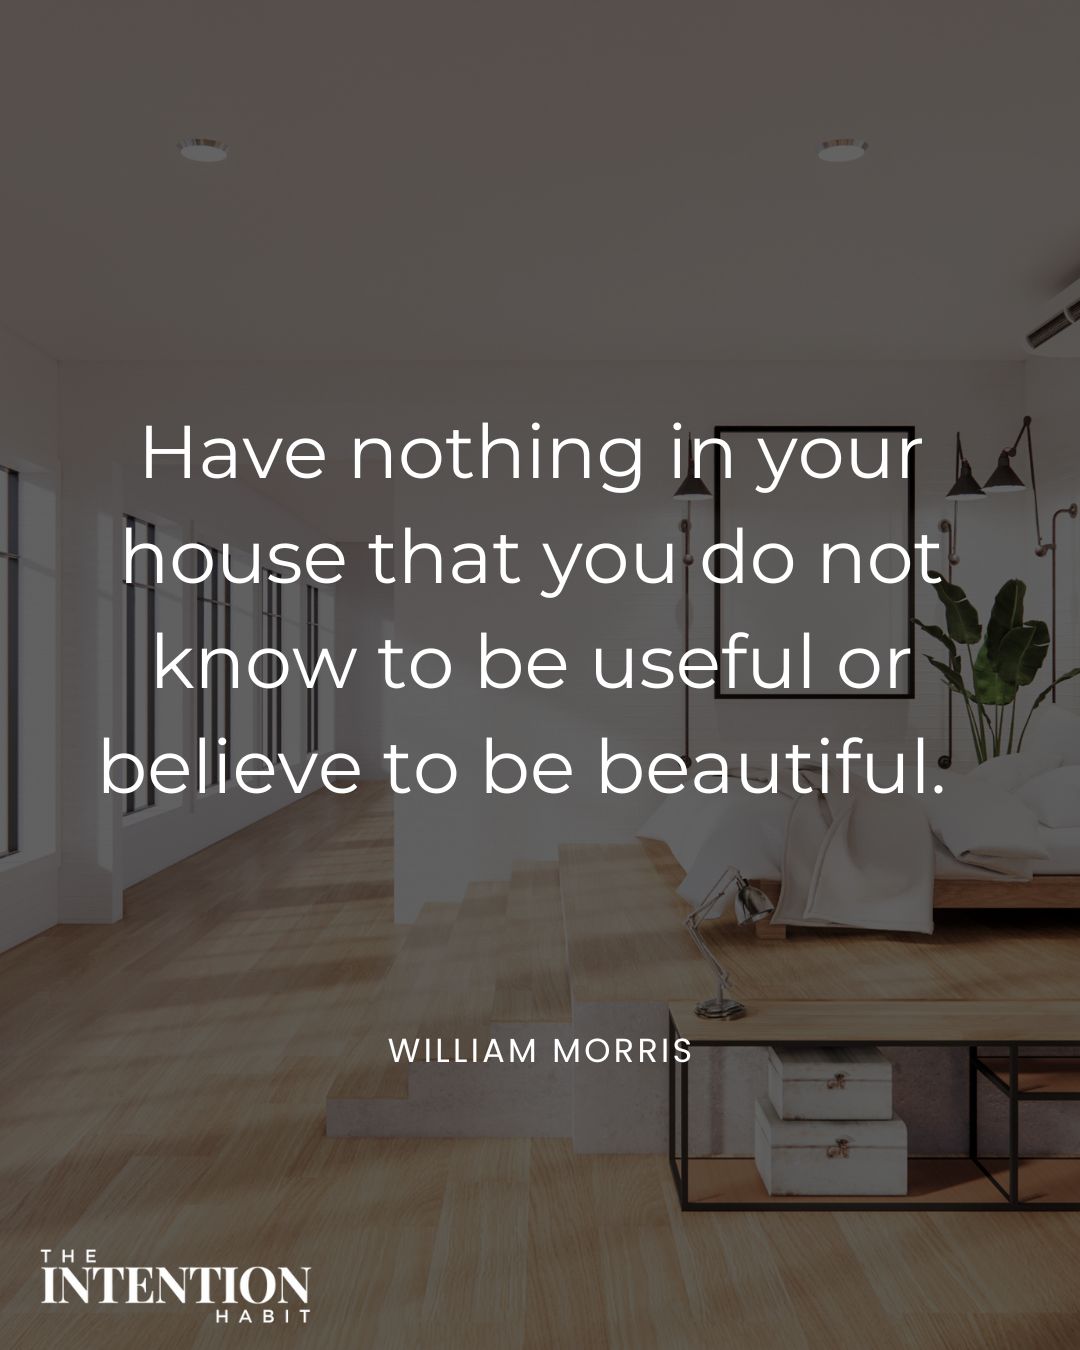 have nothing in your house that you do not know to be useful or believe to be beautiful